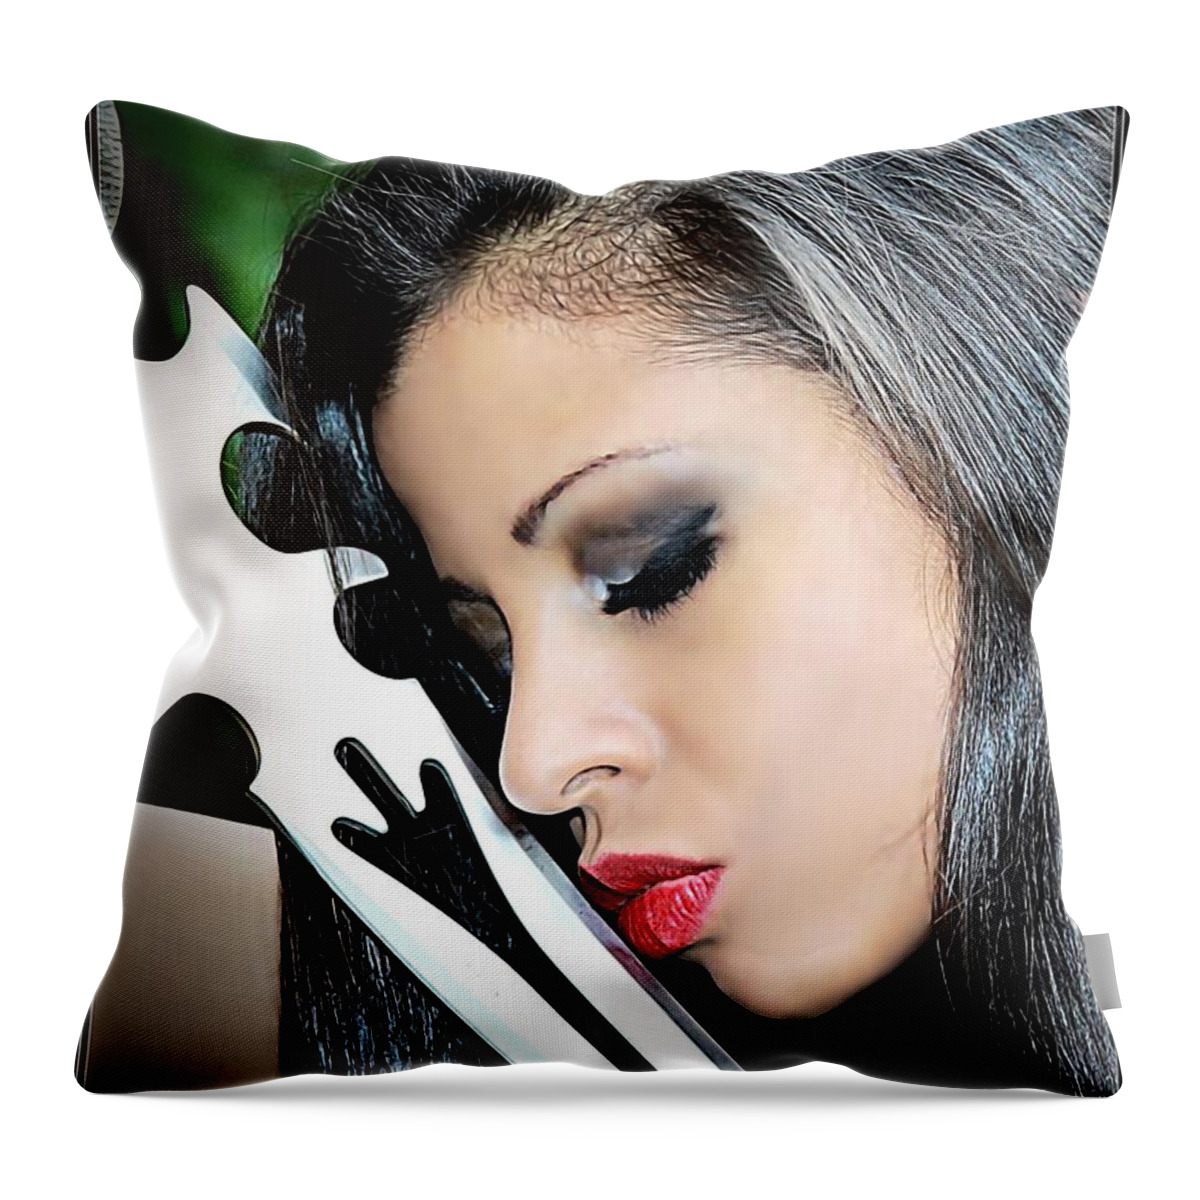 Portrait Throw Pillow featuring the photograph Love Of Steel by Jon Volden